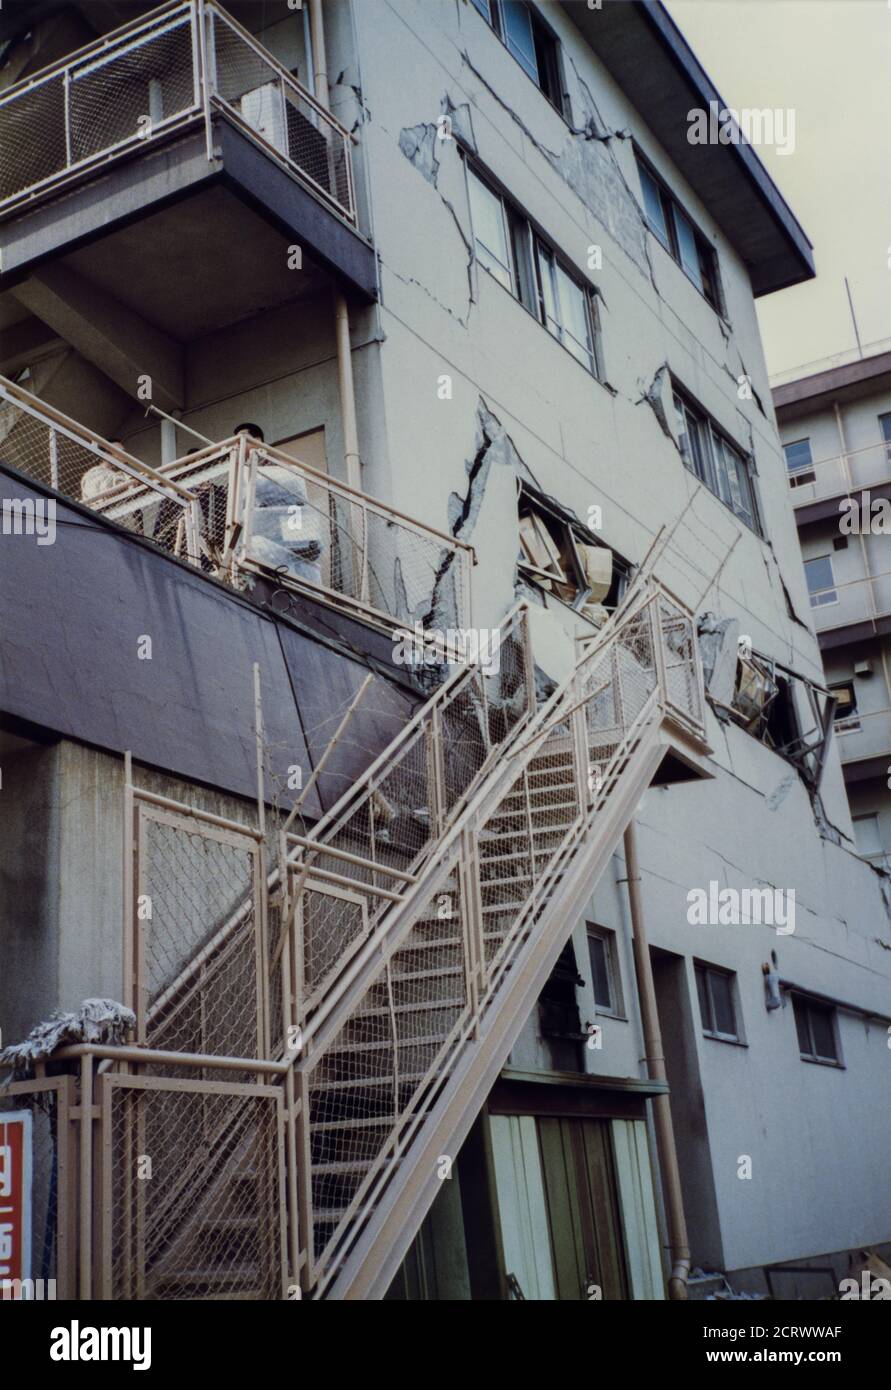 Apartment building with severe cracks and damage from the 1995 Great Hanshin Earthquake in Kobe, Japan Stock Photo